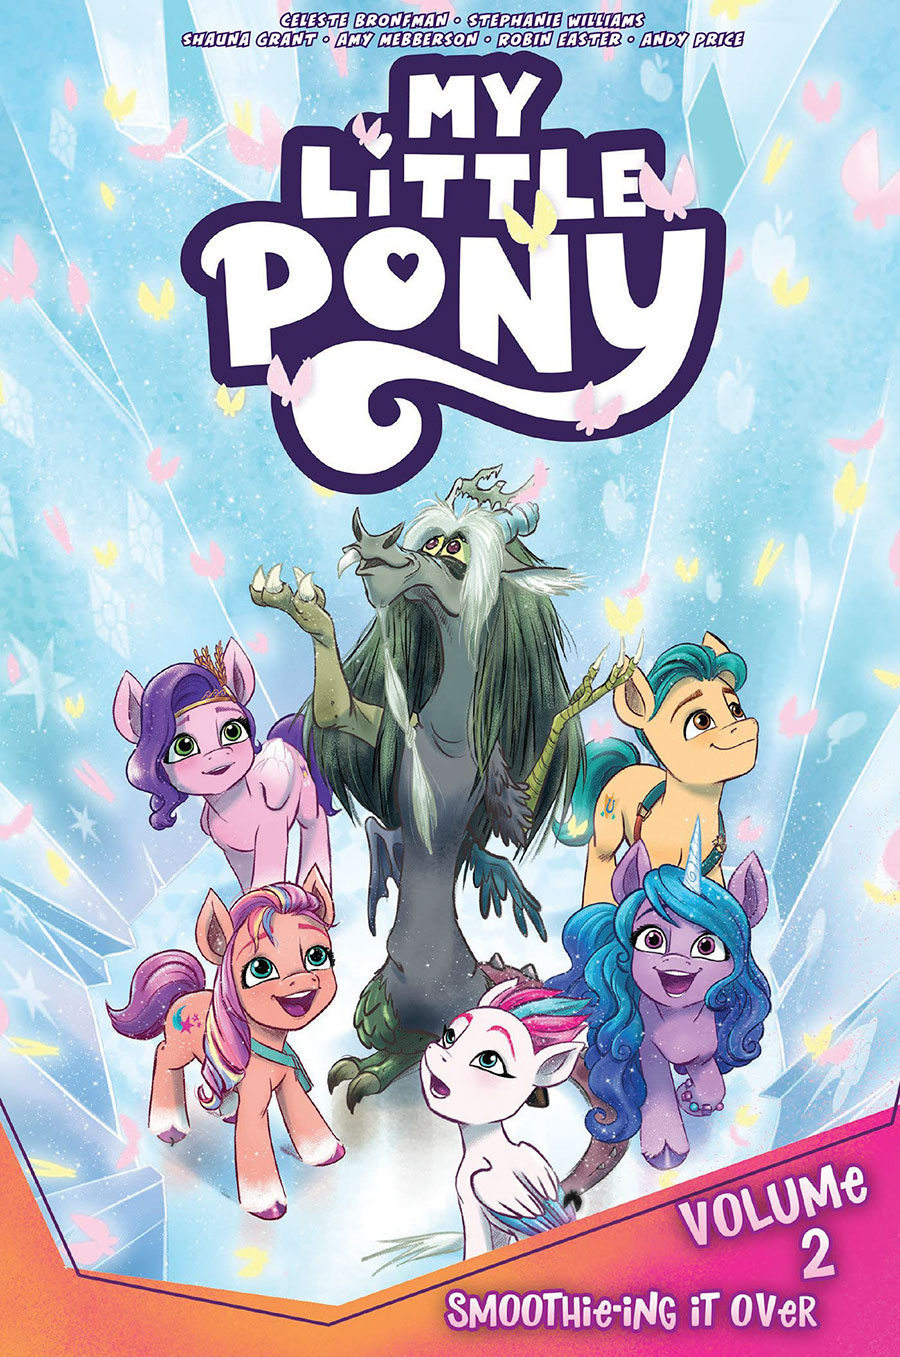 My Little Pony Vol 2 Smoothie-Ing It Over TP